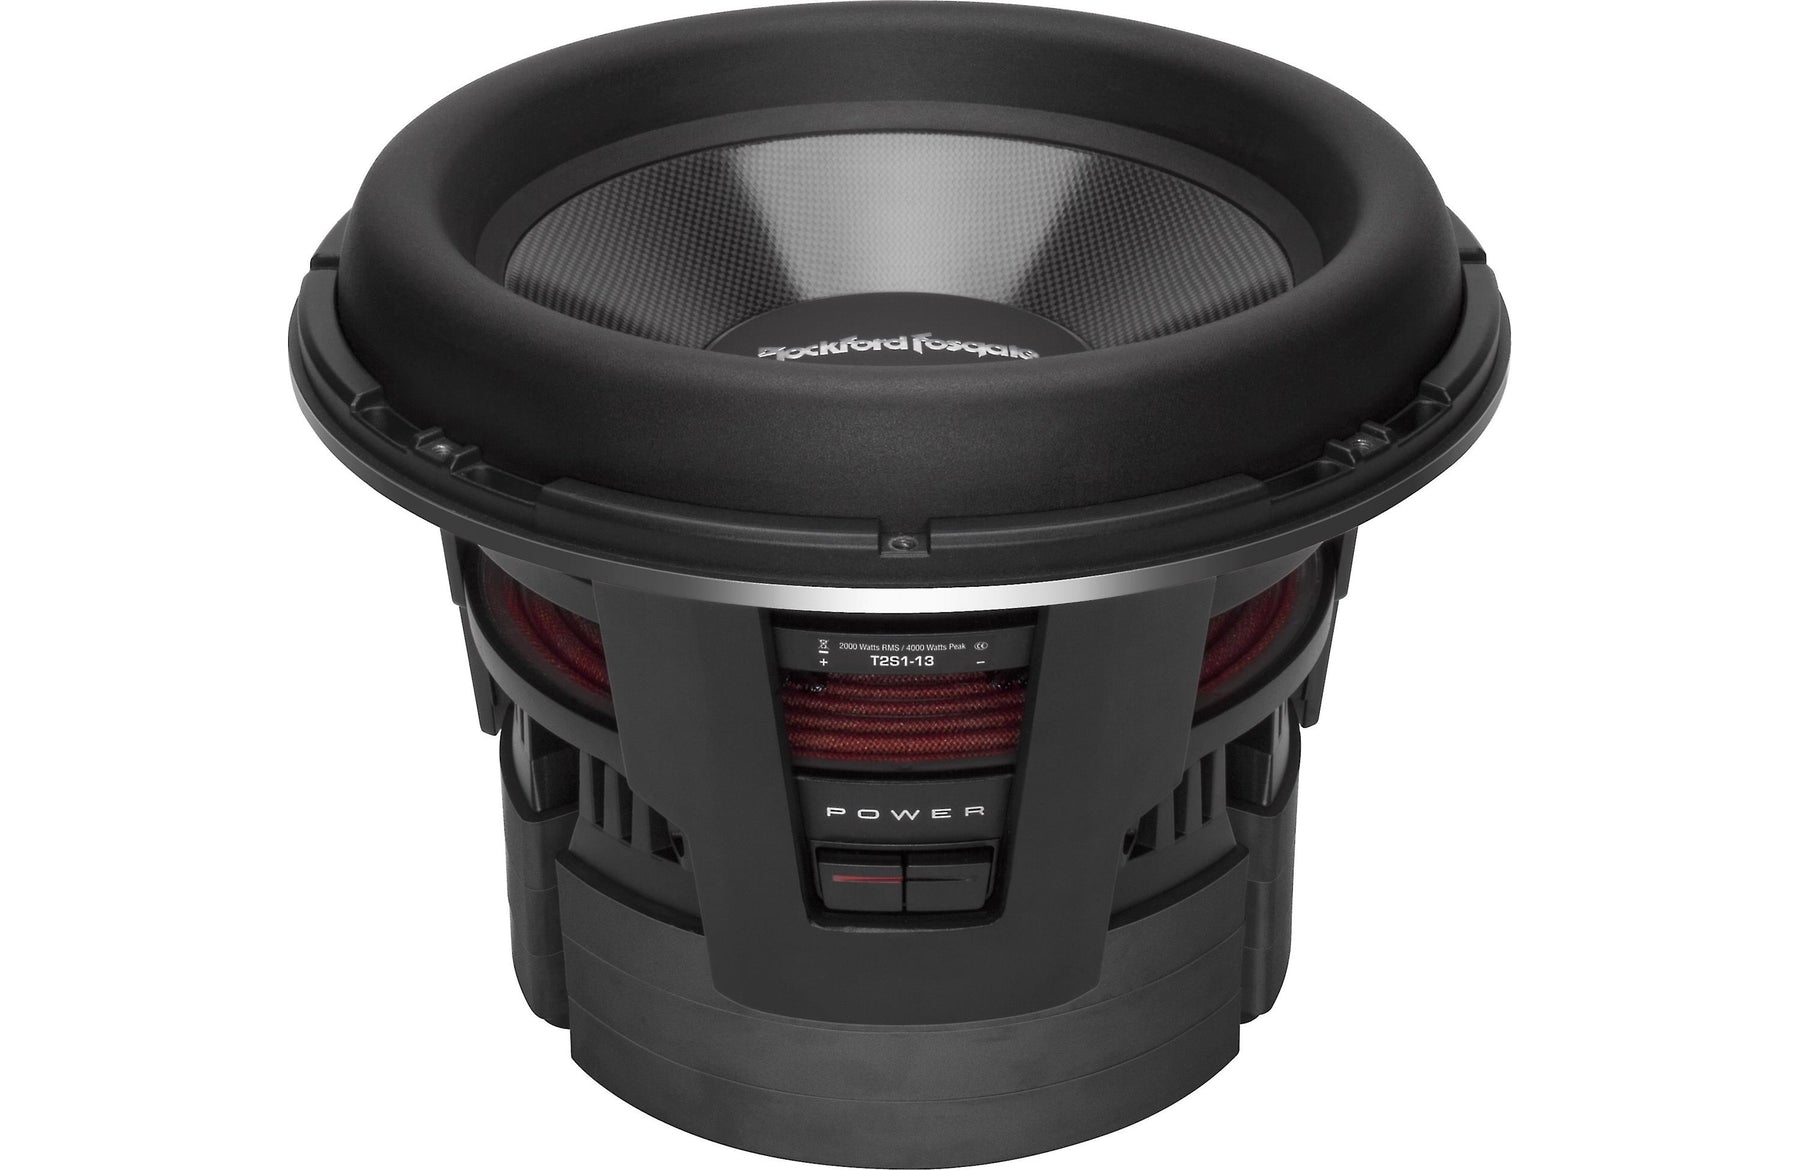 Rockford Fosgate T2S213 Power 13" T2 Single 2Ohm Subwoofer — Safe and